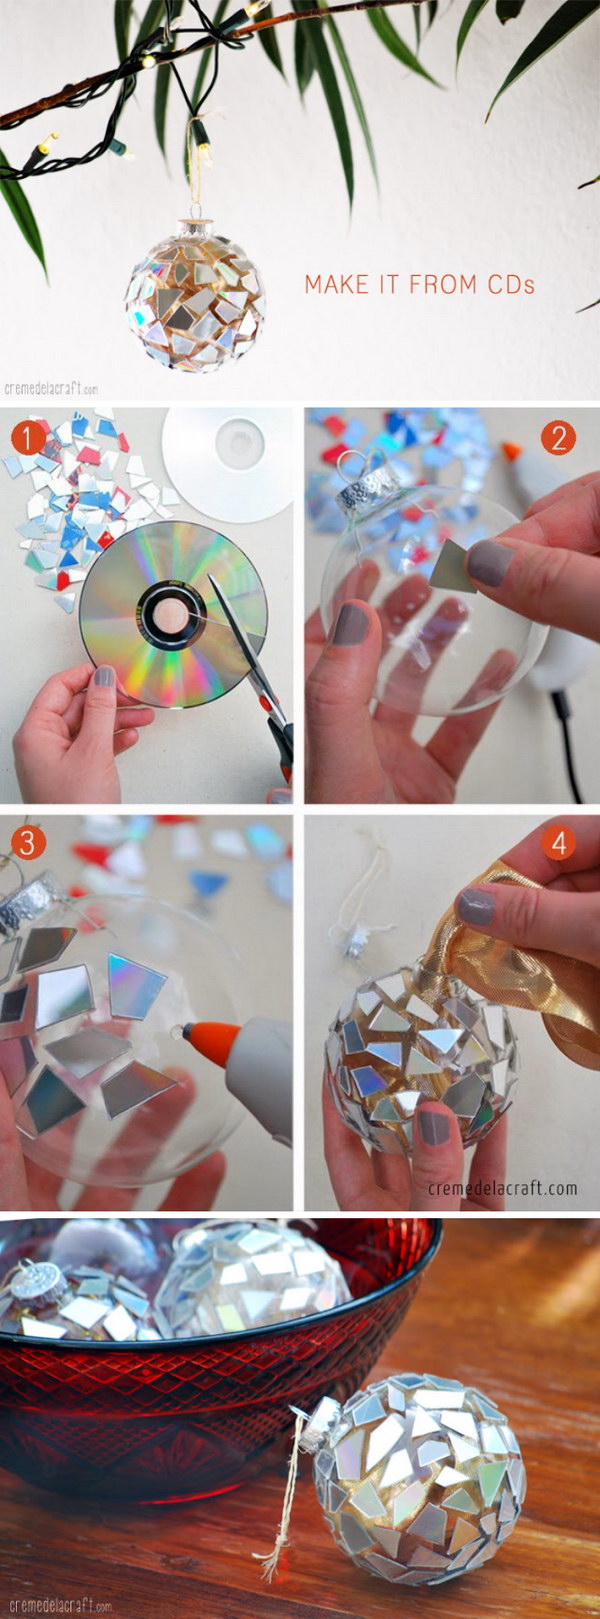 DIY Mosaic Ornaments from CDs. 